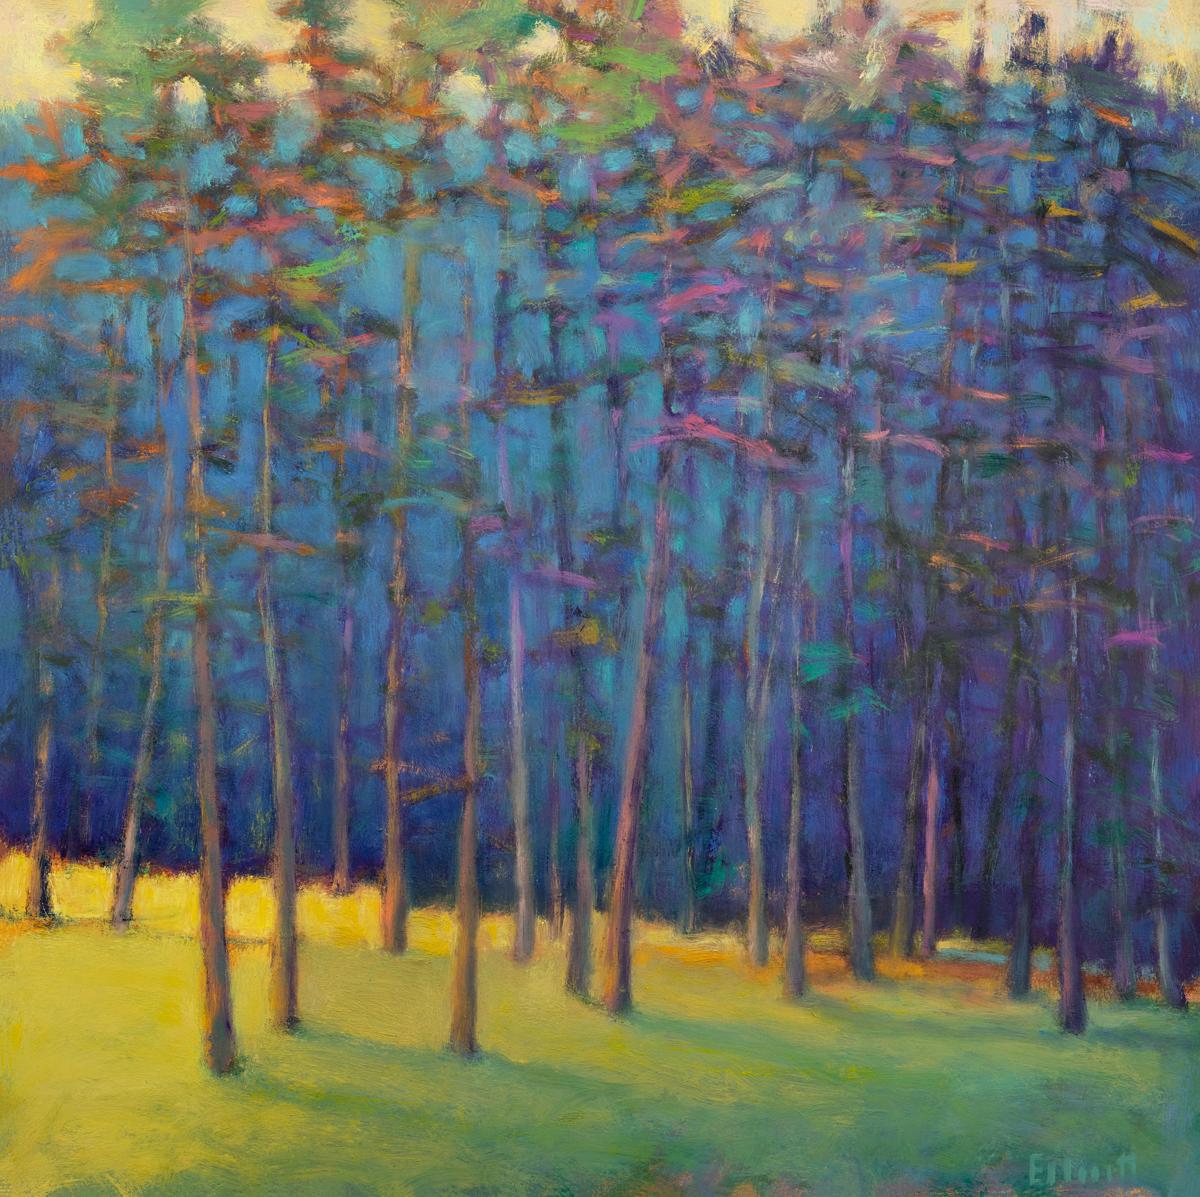 This abstract landscape limited edition print by Ken Elliott is made with oil paint features a forest scene with a bold, contrasting palette of cool, deep blues that are accented by vibrant yellow, pink, and orange throughout. 

